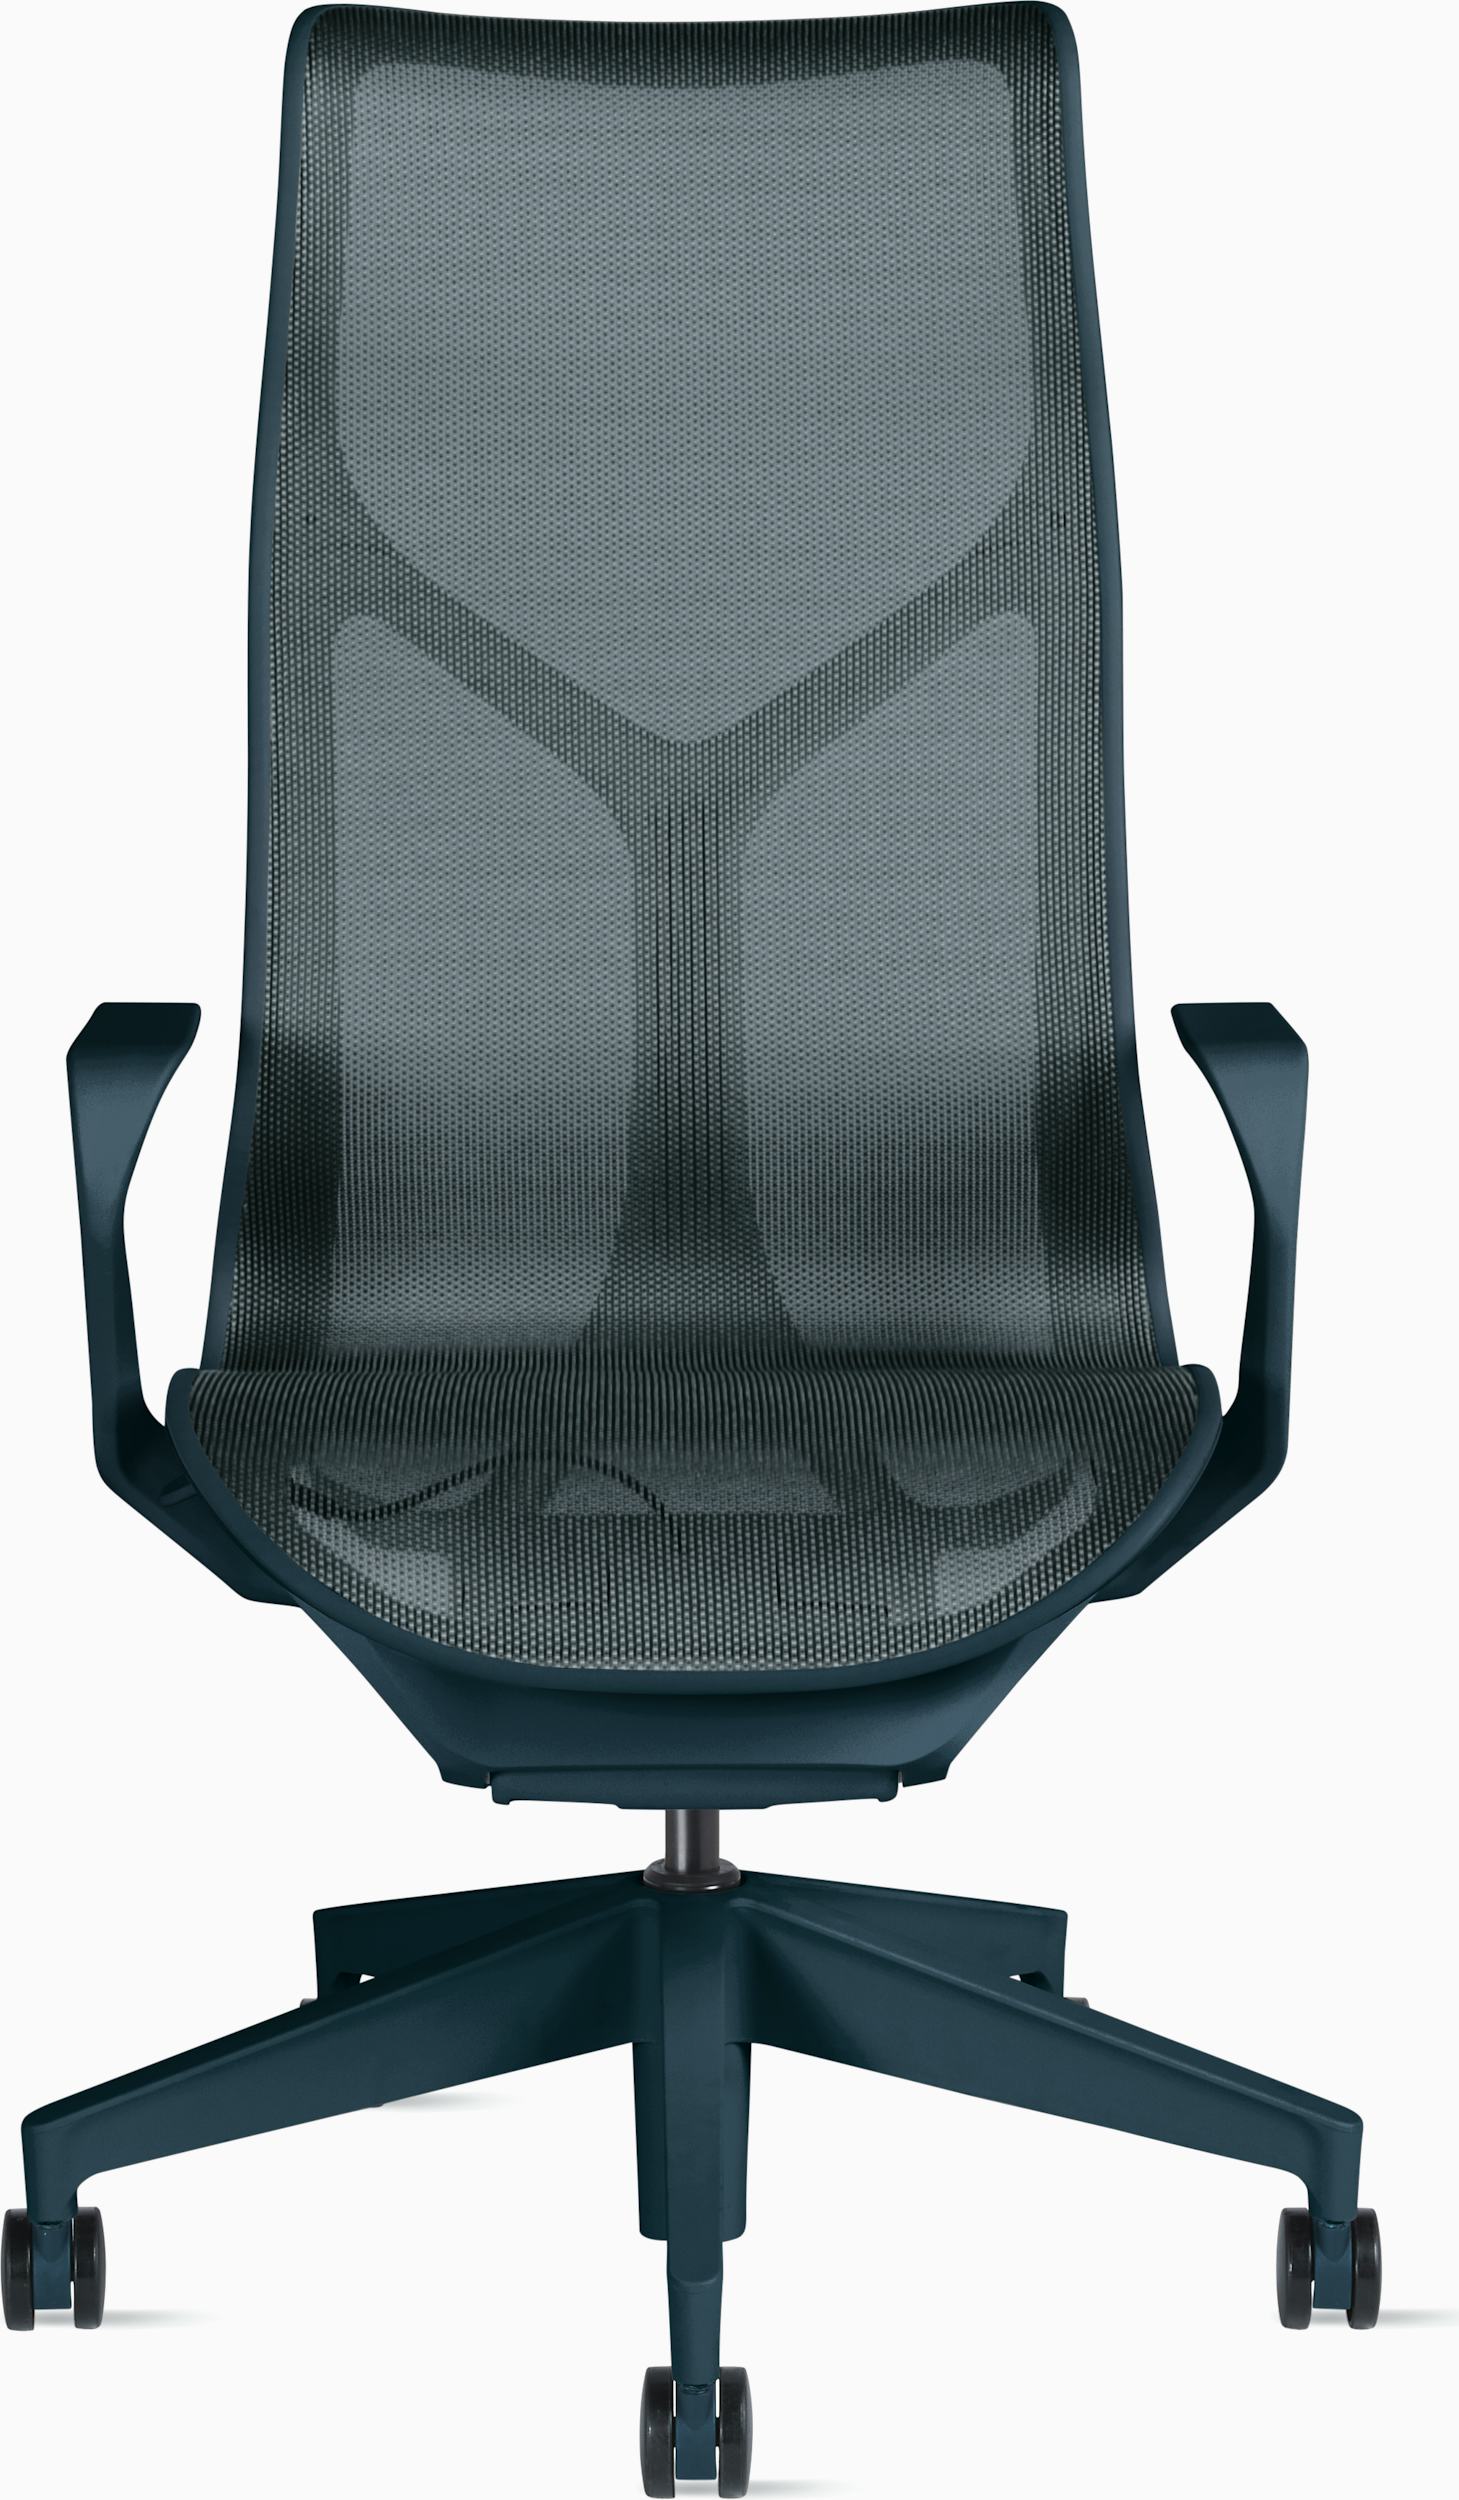 Authentic Herman Miller® Embody® Task Chair Carbon Balance Fabric loaded